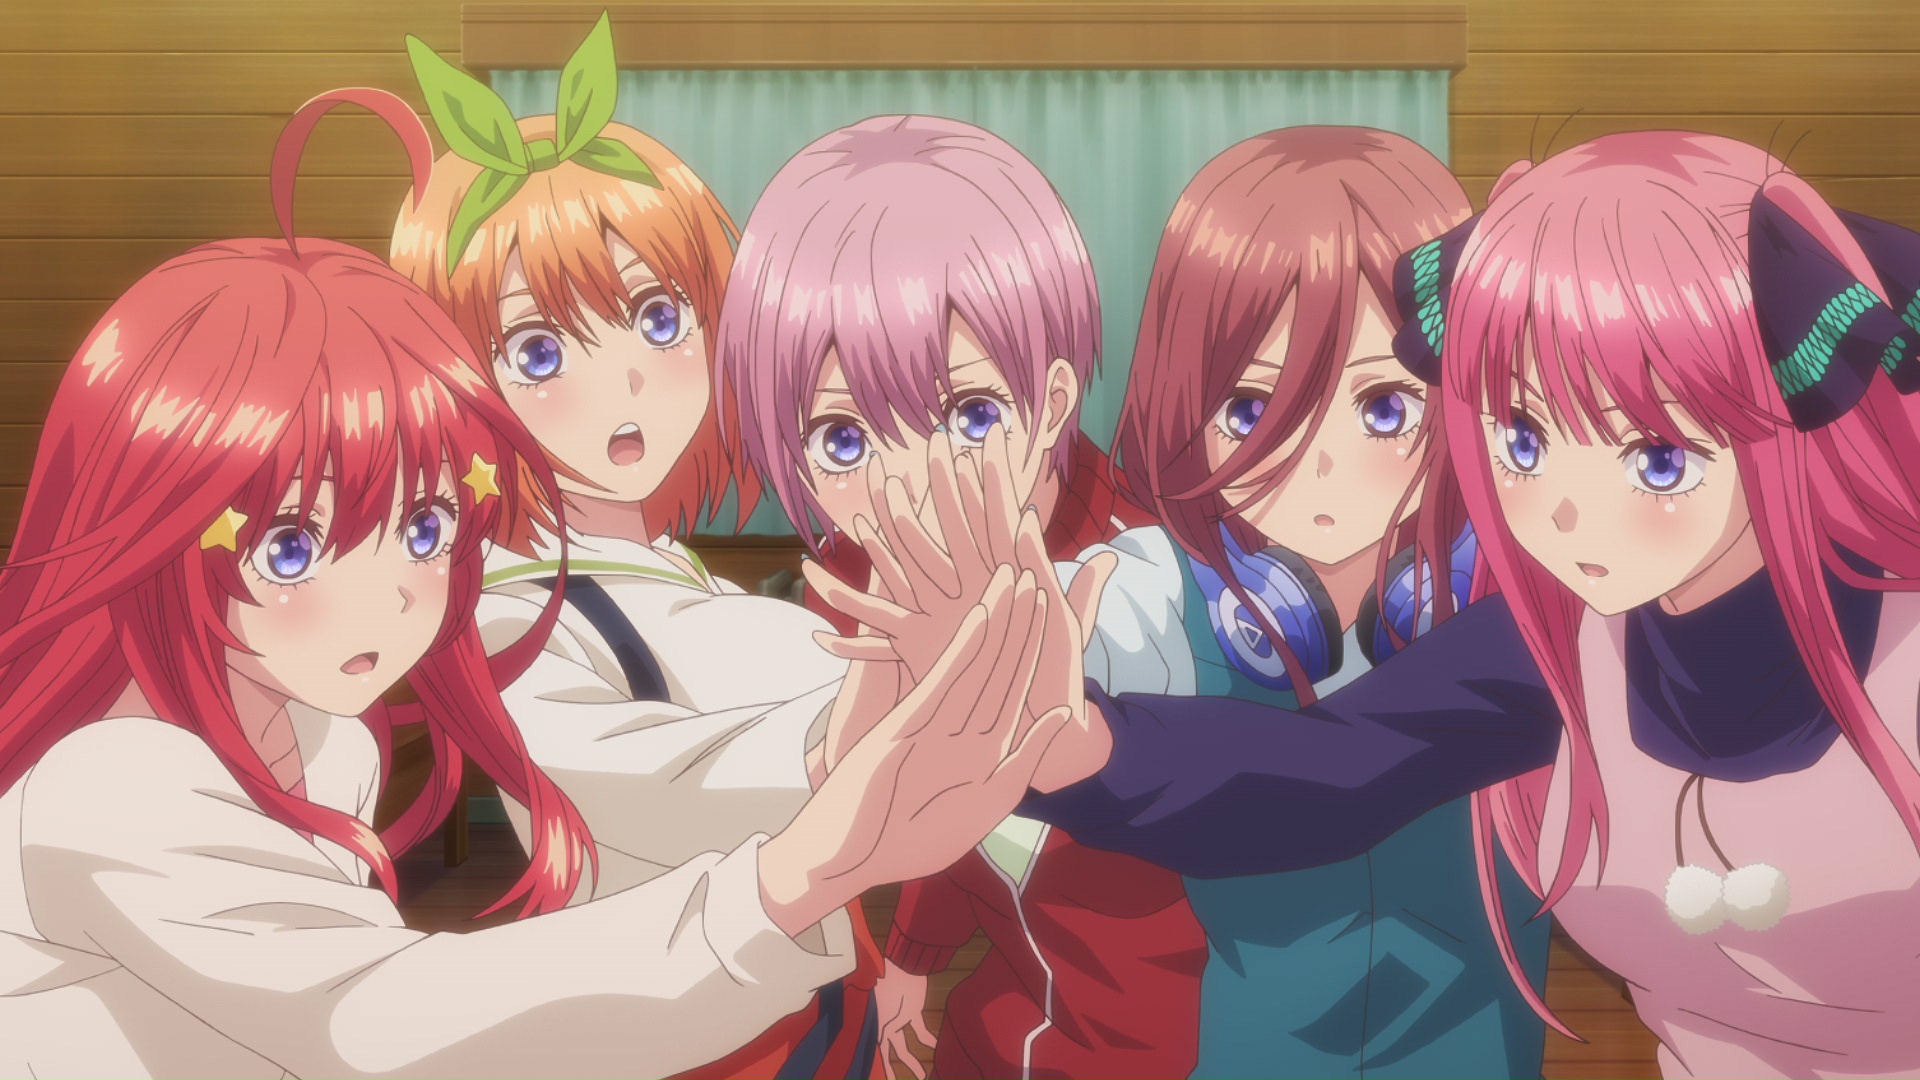 anime production - 2 versions of The Quintessential Quintuplets